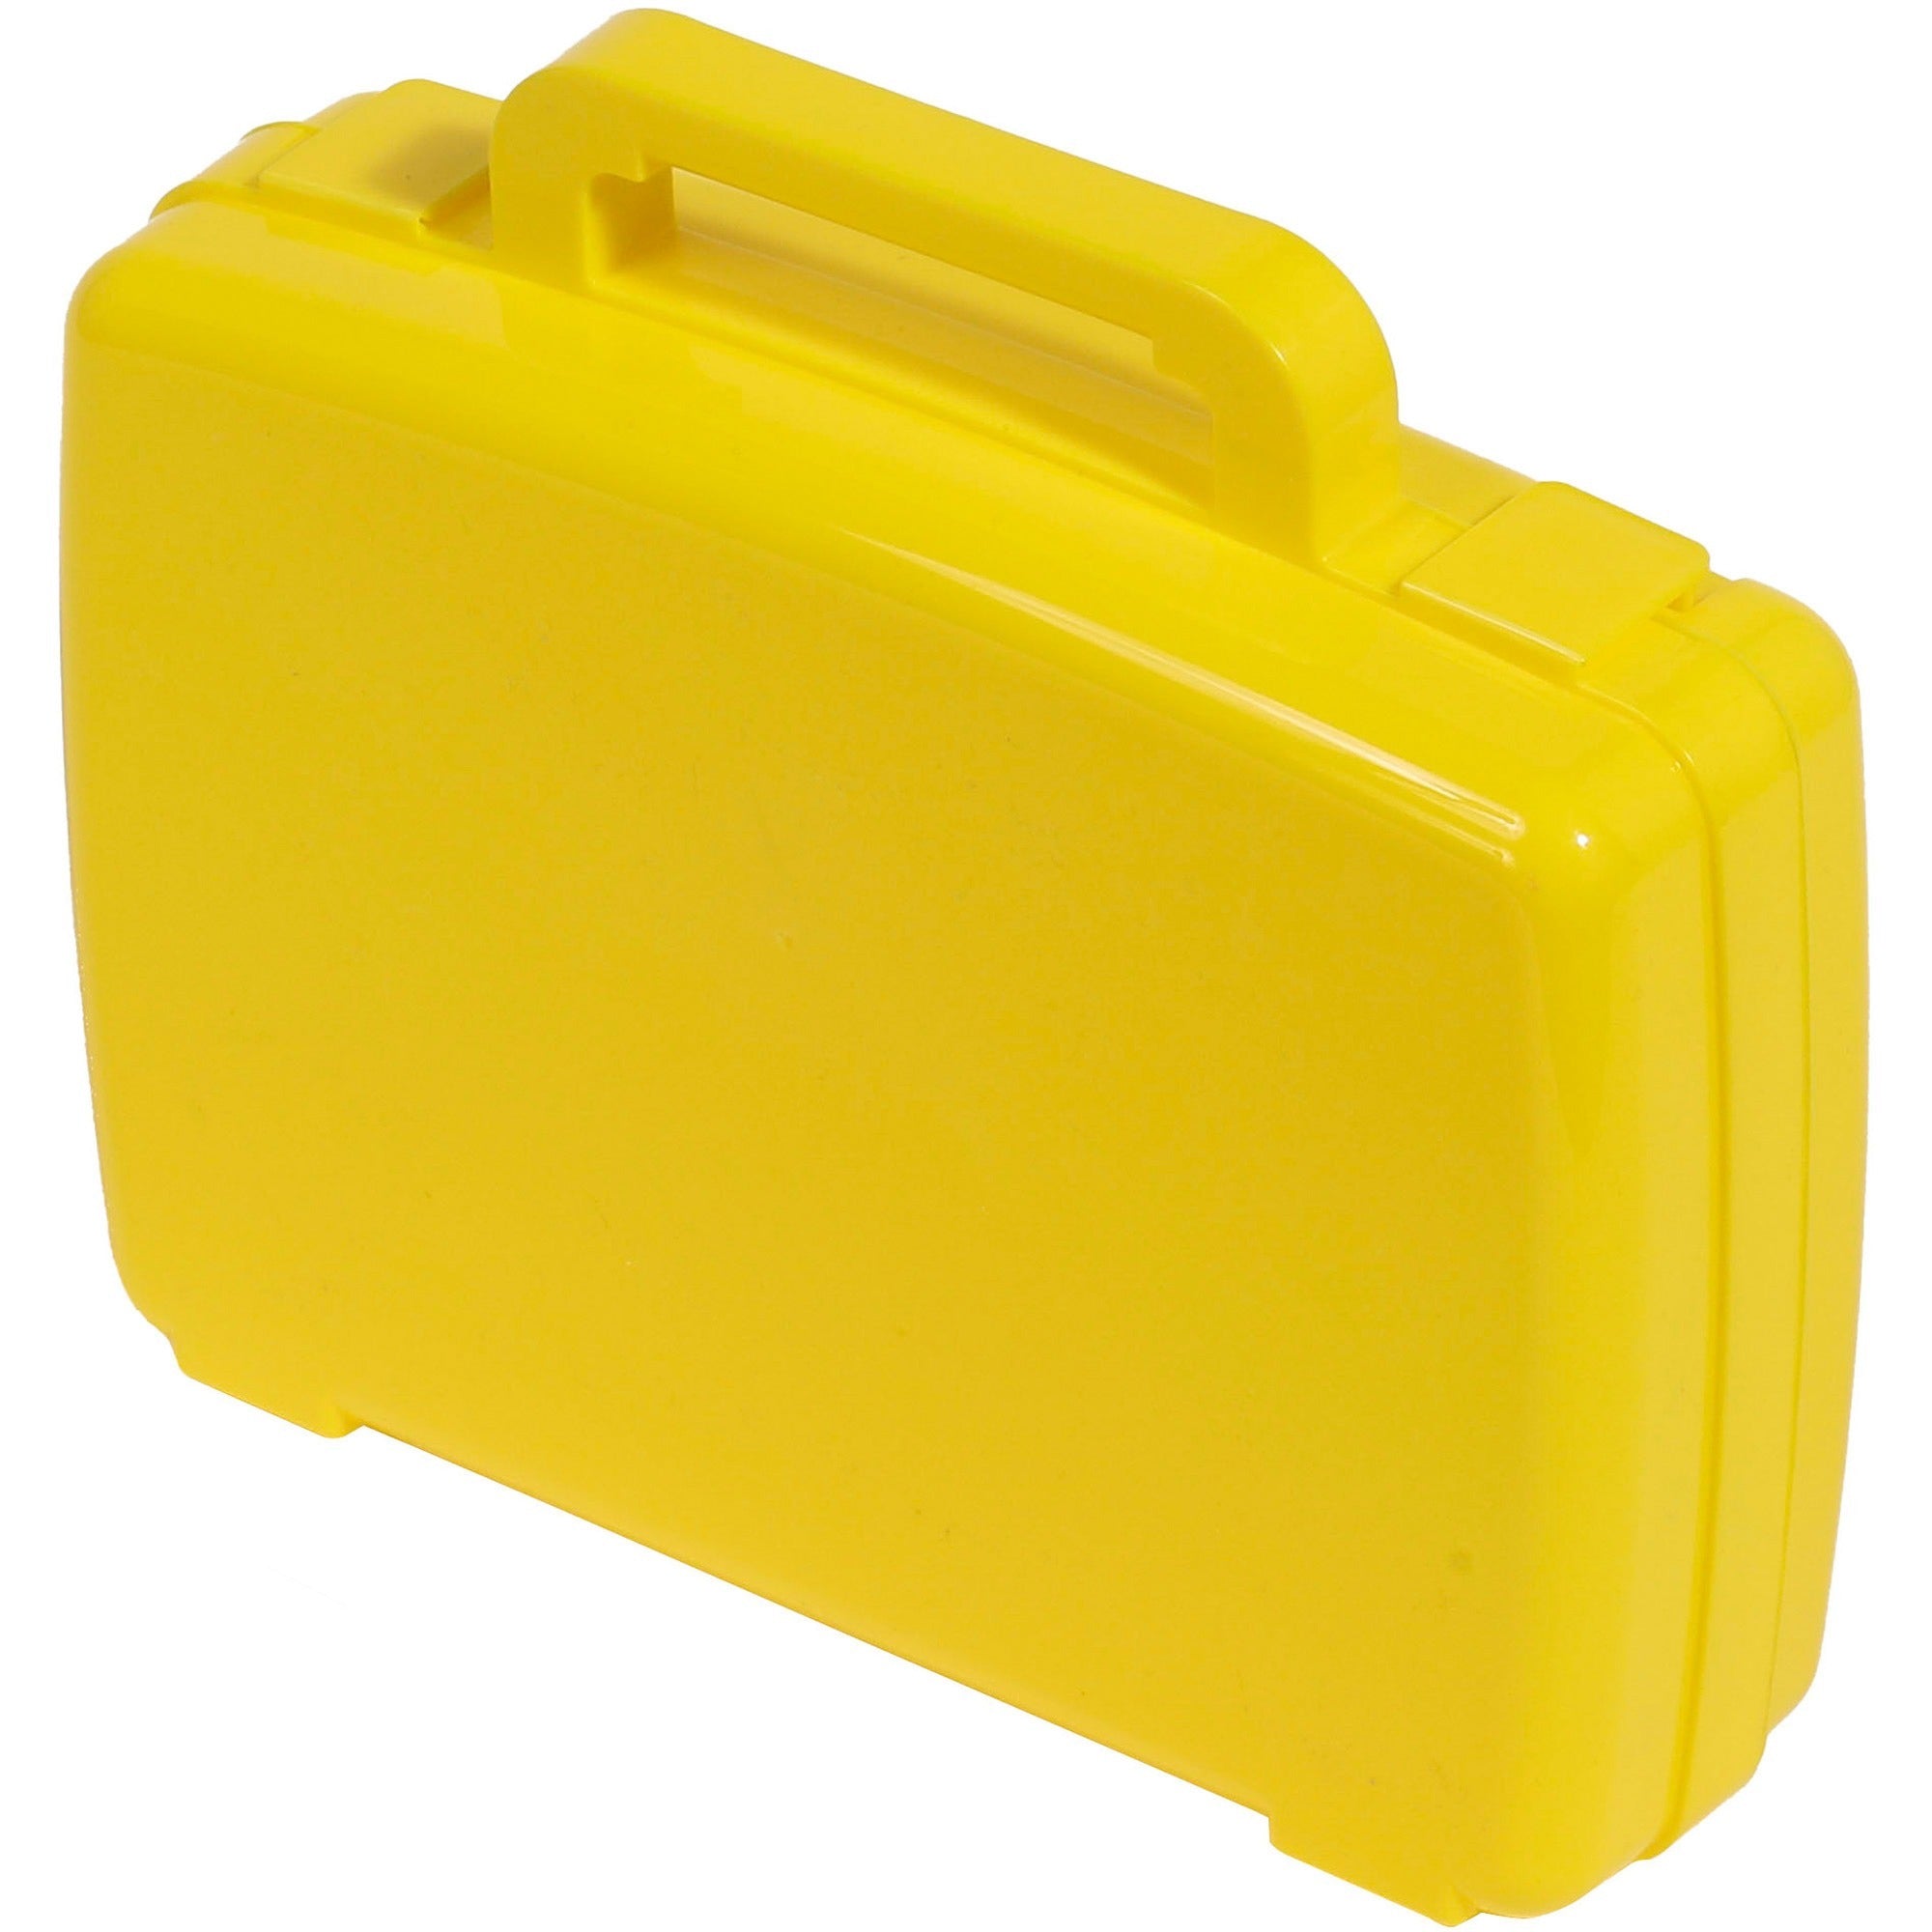 deflecto-antimicrobial-storage-case-yellow-external-dimensions-86-width-x-102-depth-x-27-height-snap-tight-closure-plastic-yellow-for-photo-art-craft-supplies_def39506yel - 2